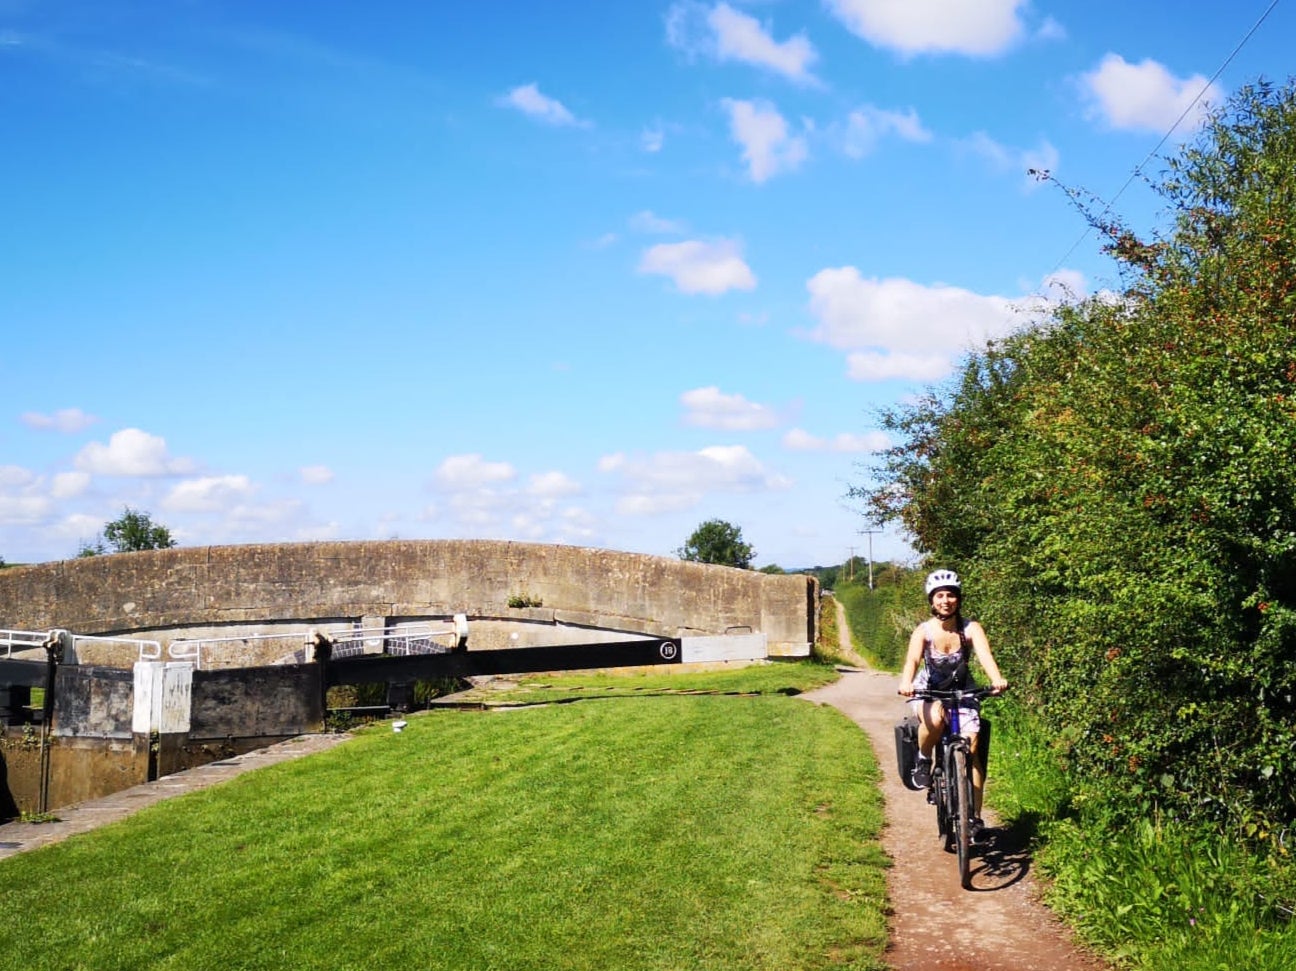 On your bike: Keep it simple on your first cycling holiday